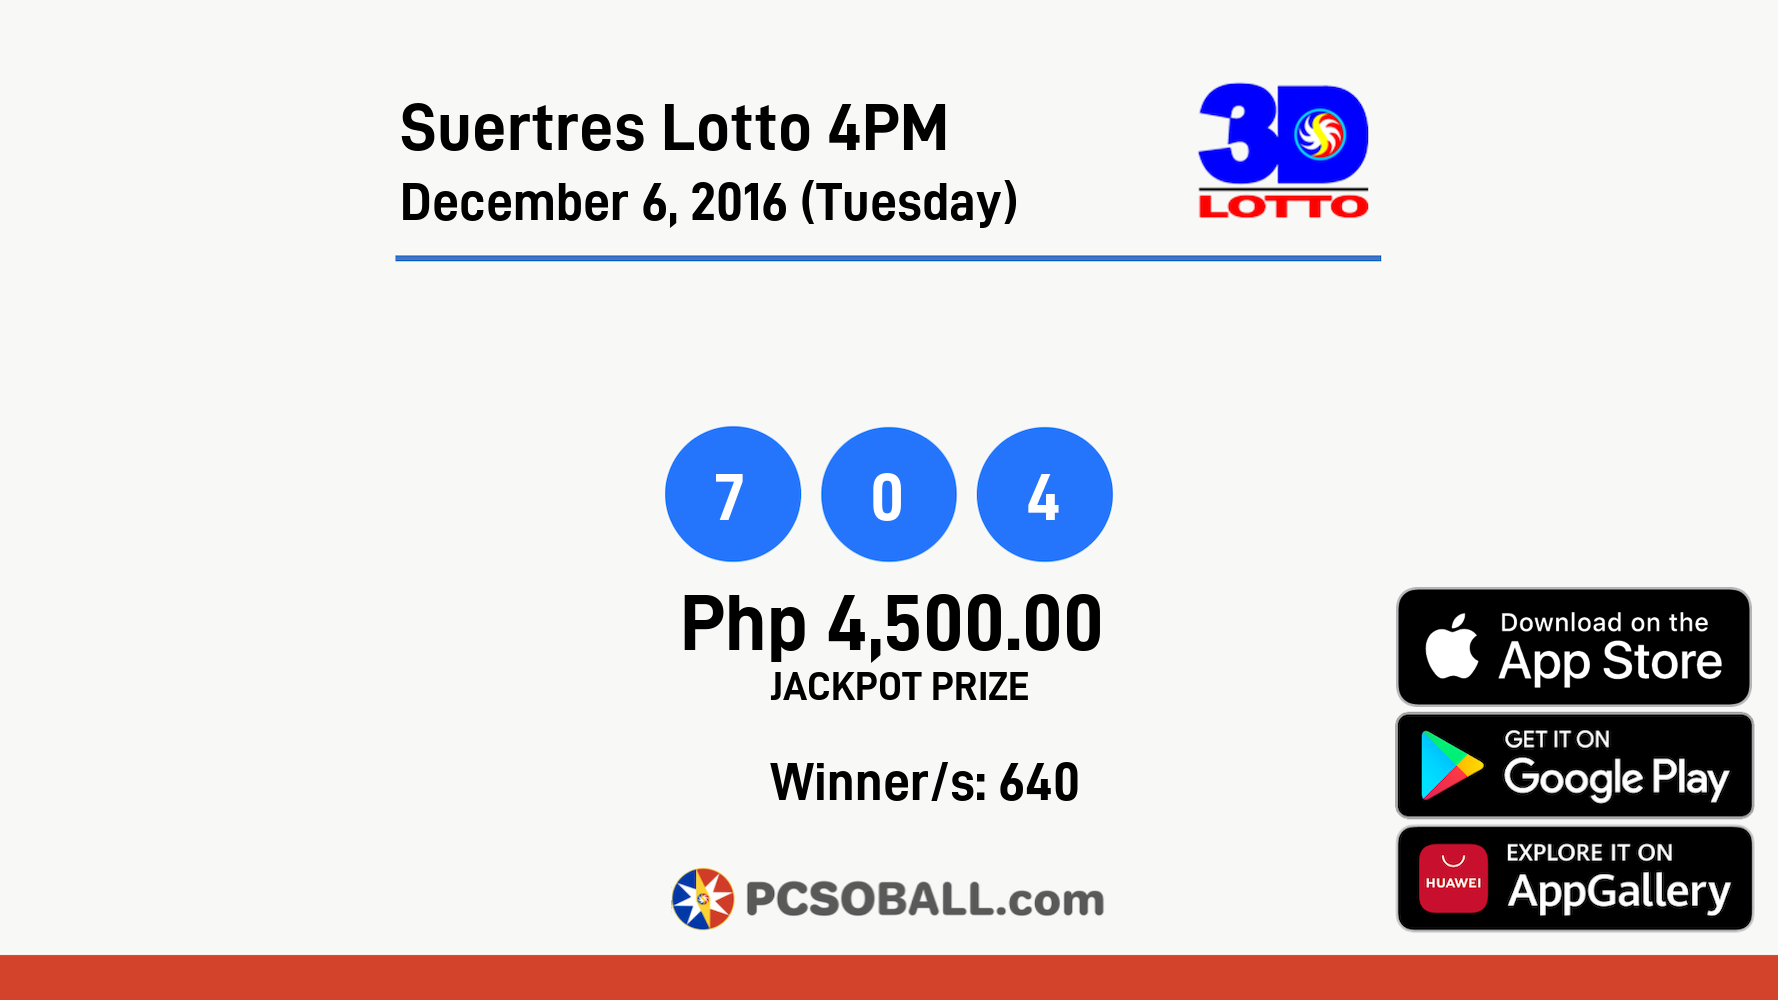 Suertres Lotto 4PM December 6, 2016 (Tuesday) Result